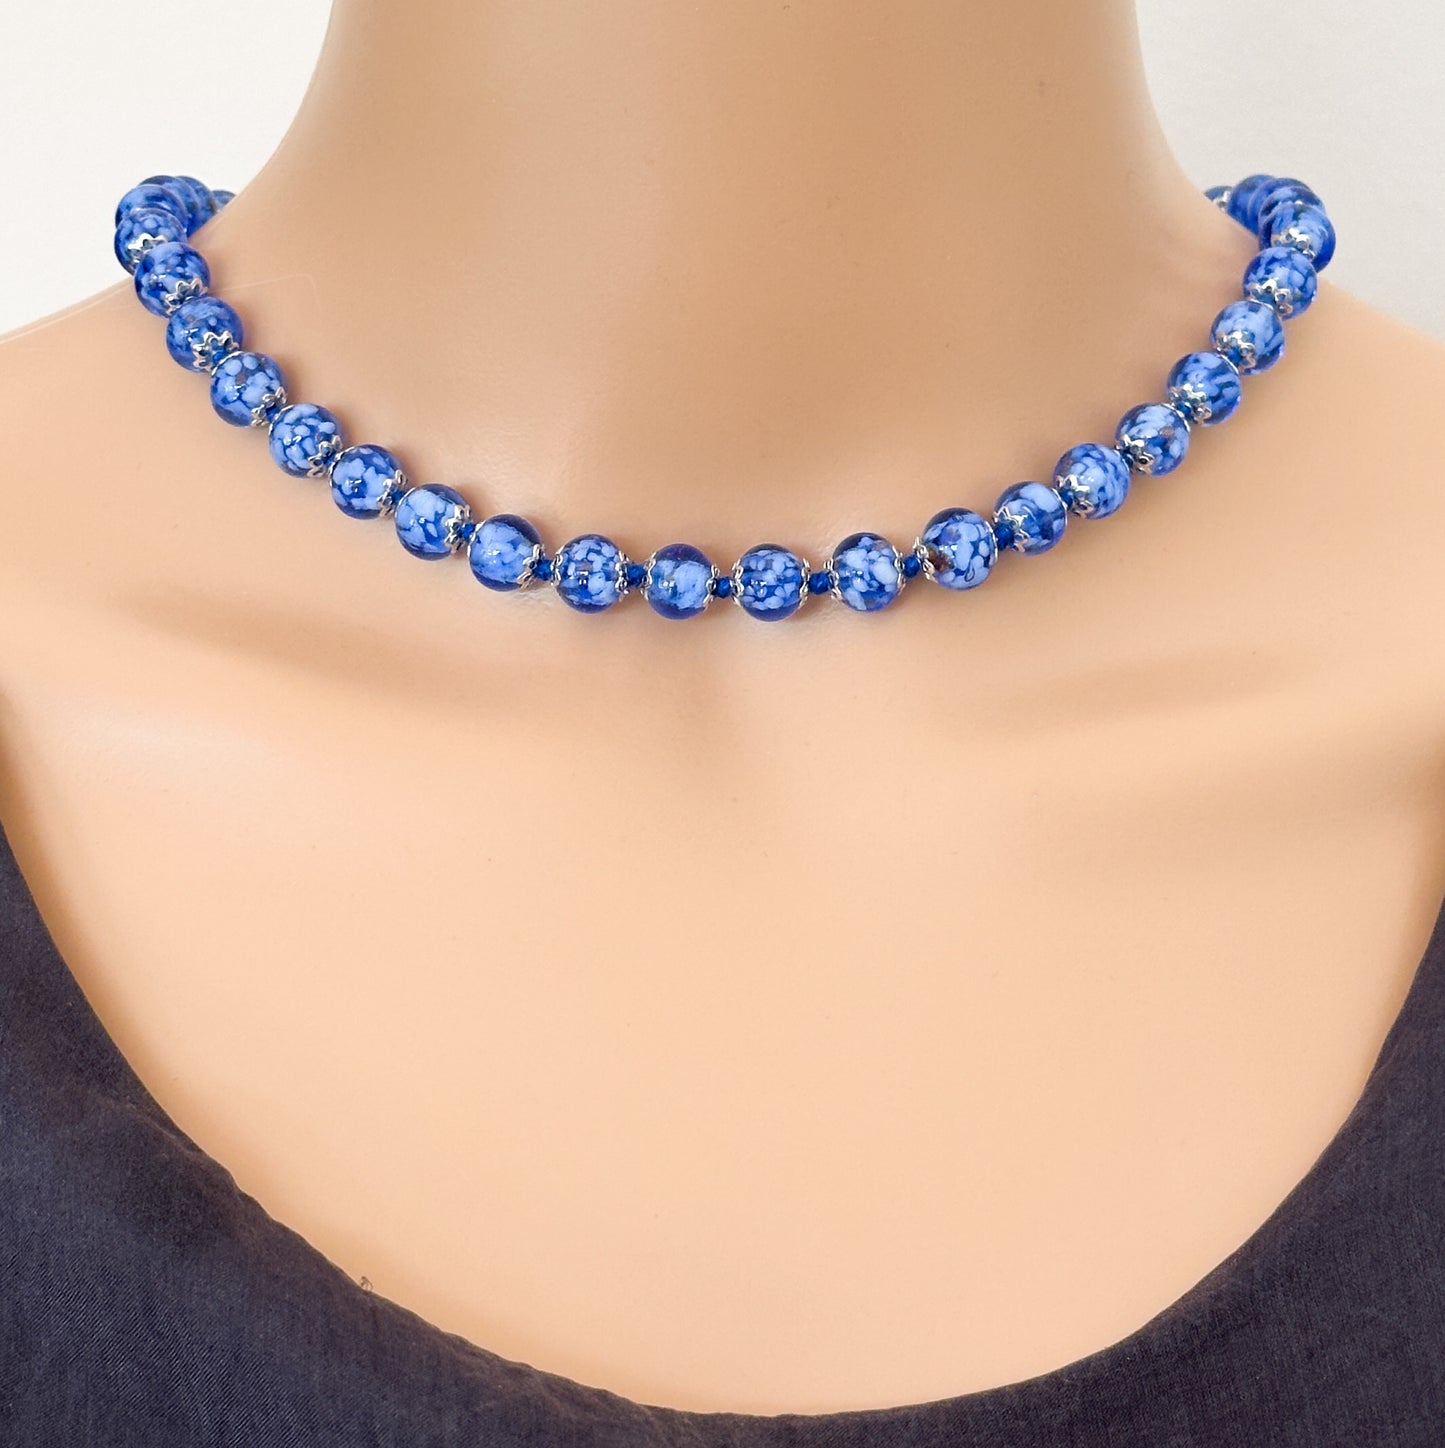 Murano glass bead necklace with silver findings